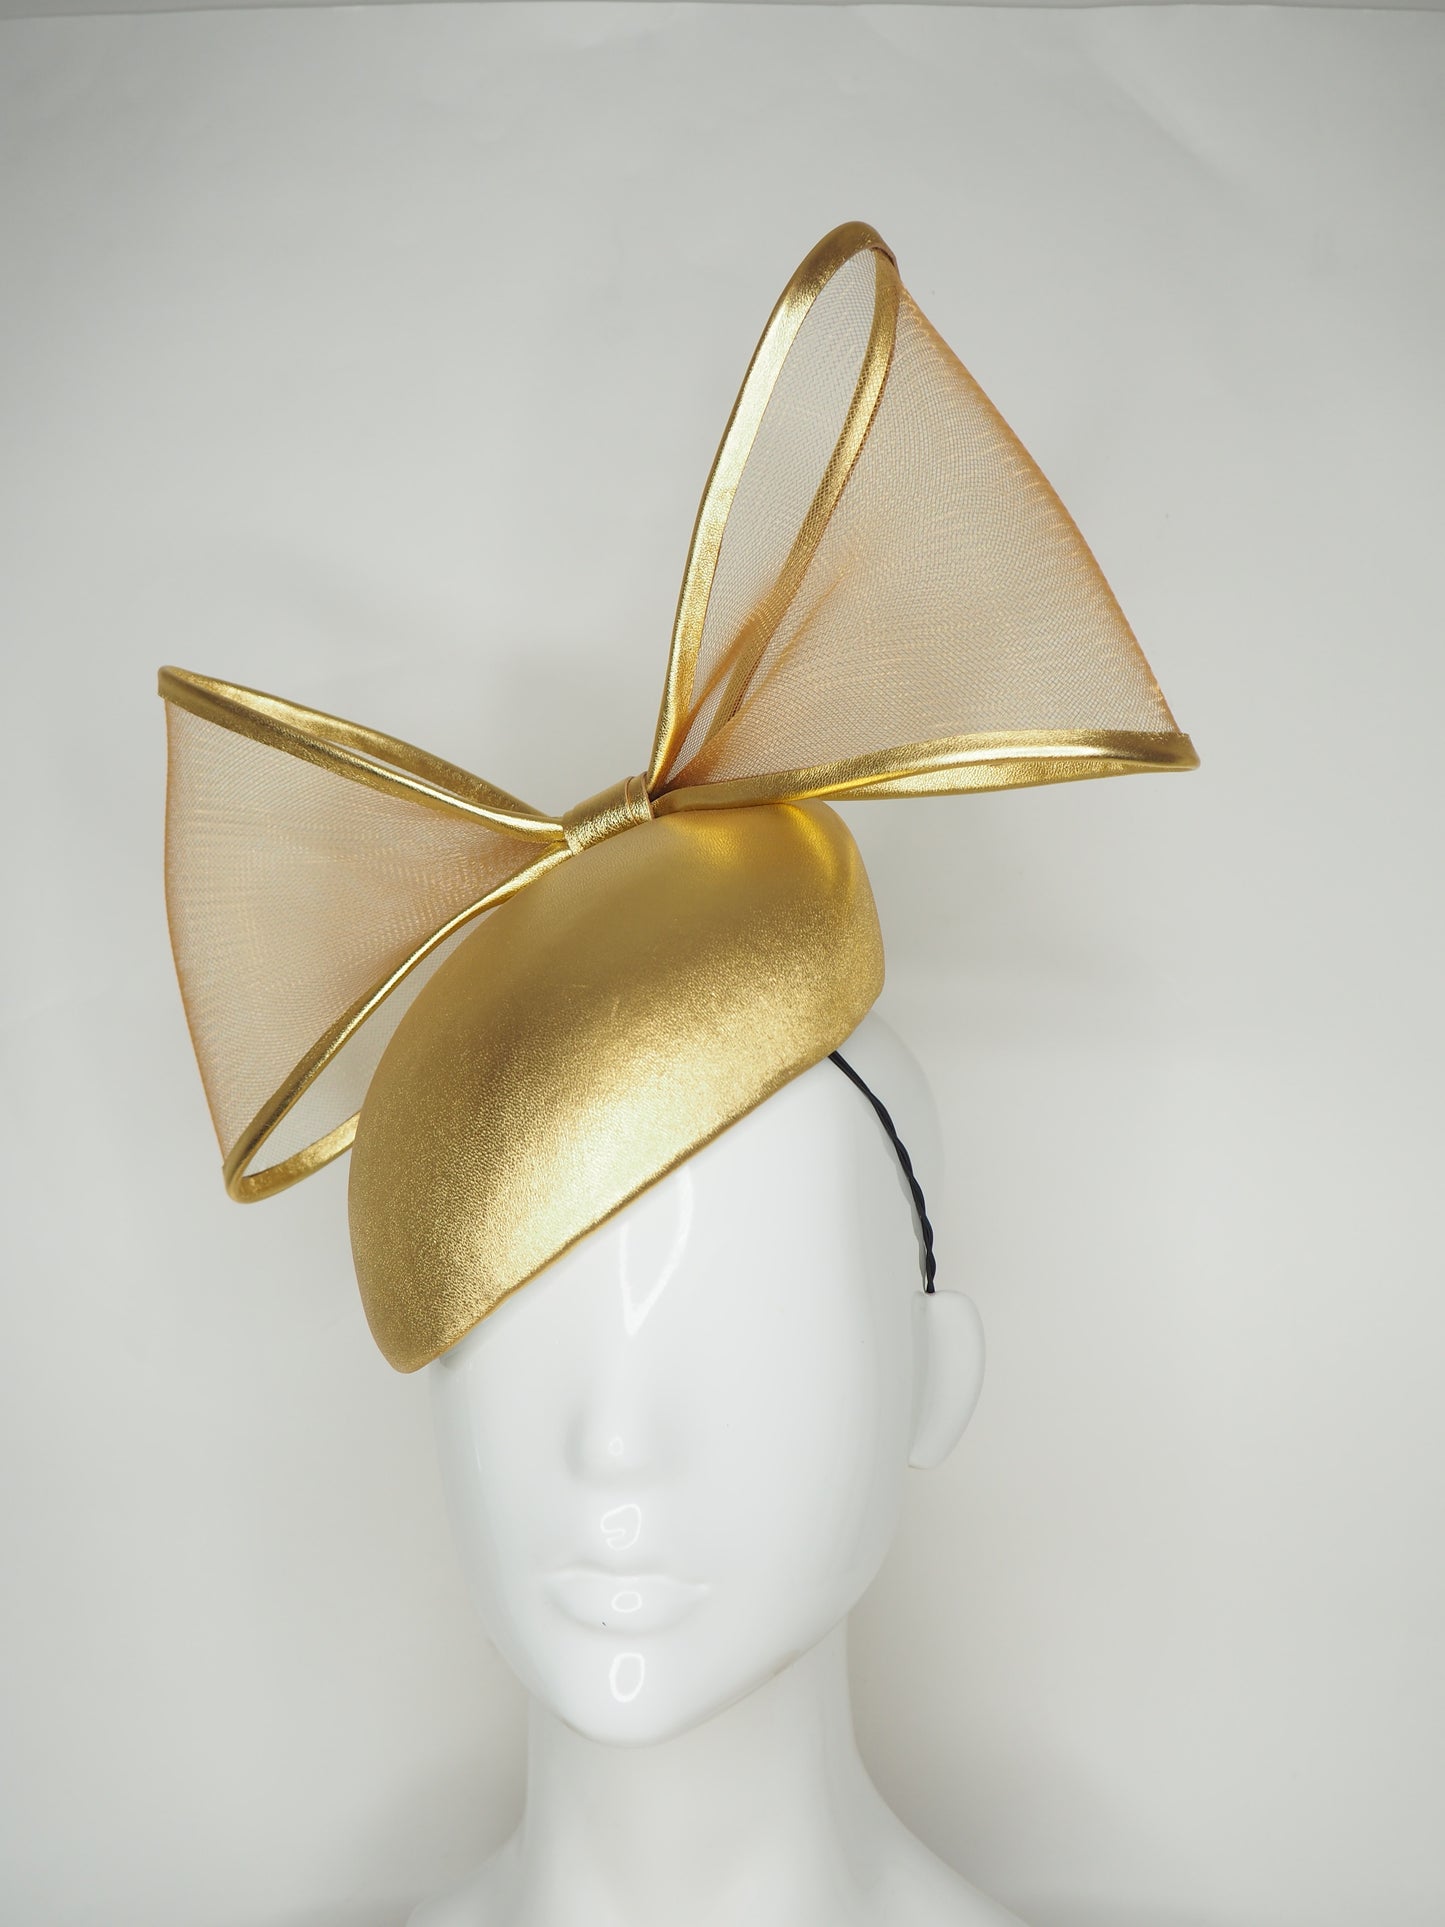 Golden hour - Gold leather beret with translucent crinoline bow